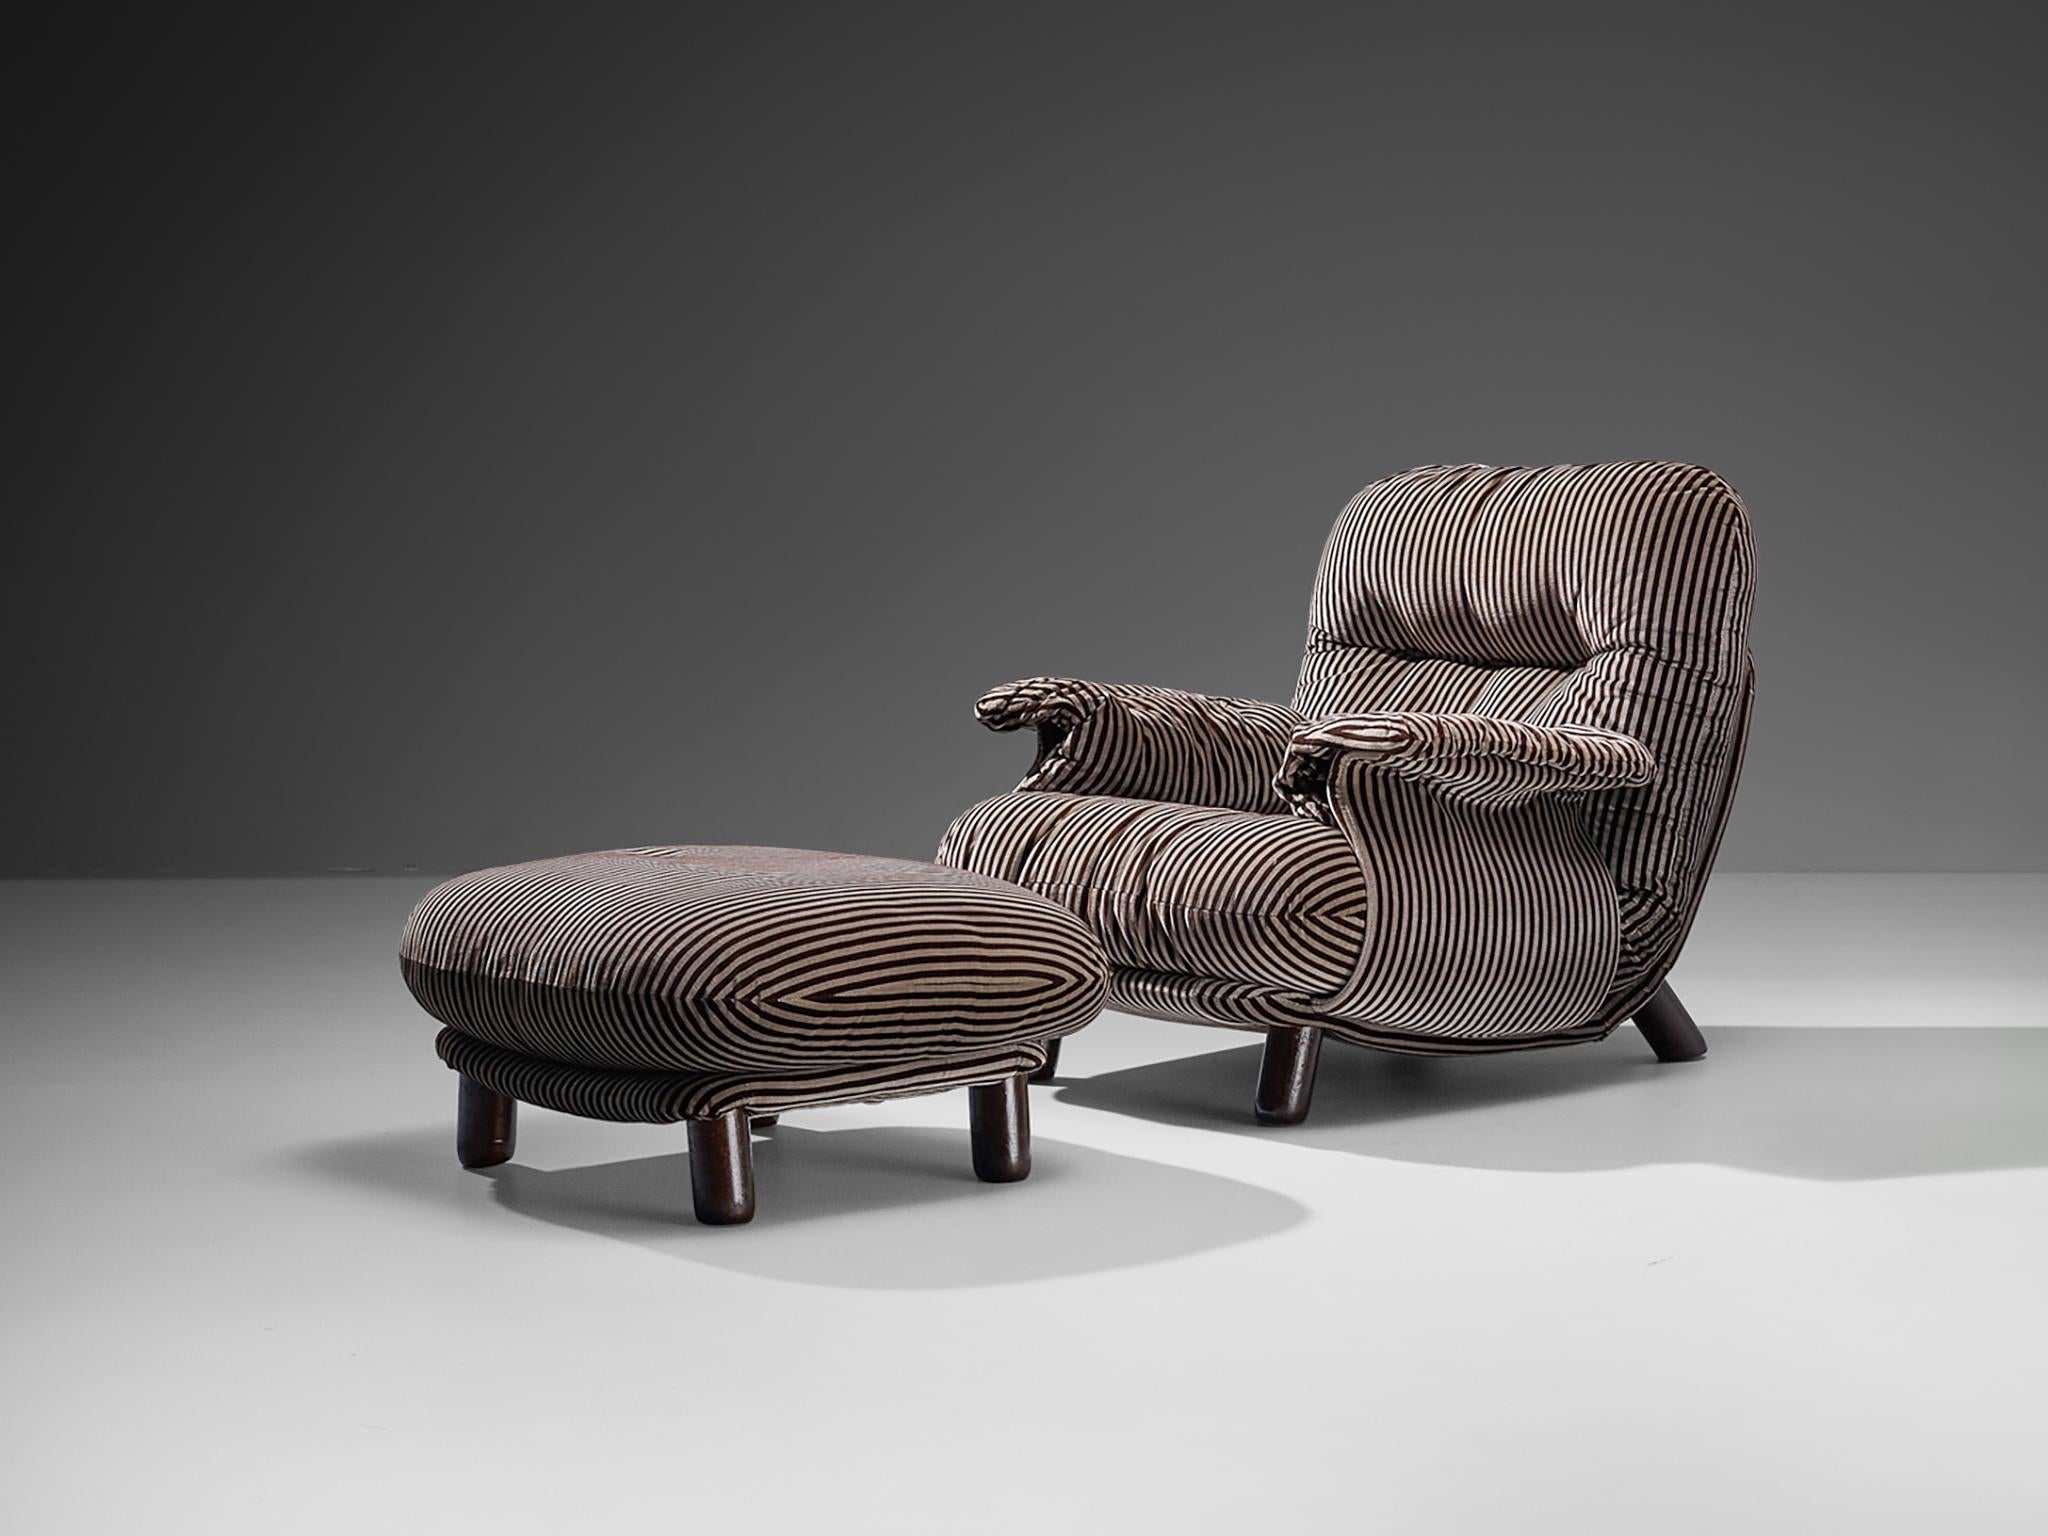 E. Cobianchi for Insa, lounge chair with ottoman, fabric, stained wood, Italy, 1970s

An Italian set of bulky easy chair and ottoman designed by E. Cobianchi. The lounge chair features a thick, tufted seat and backrest. The armrests are curved in an